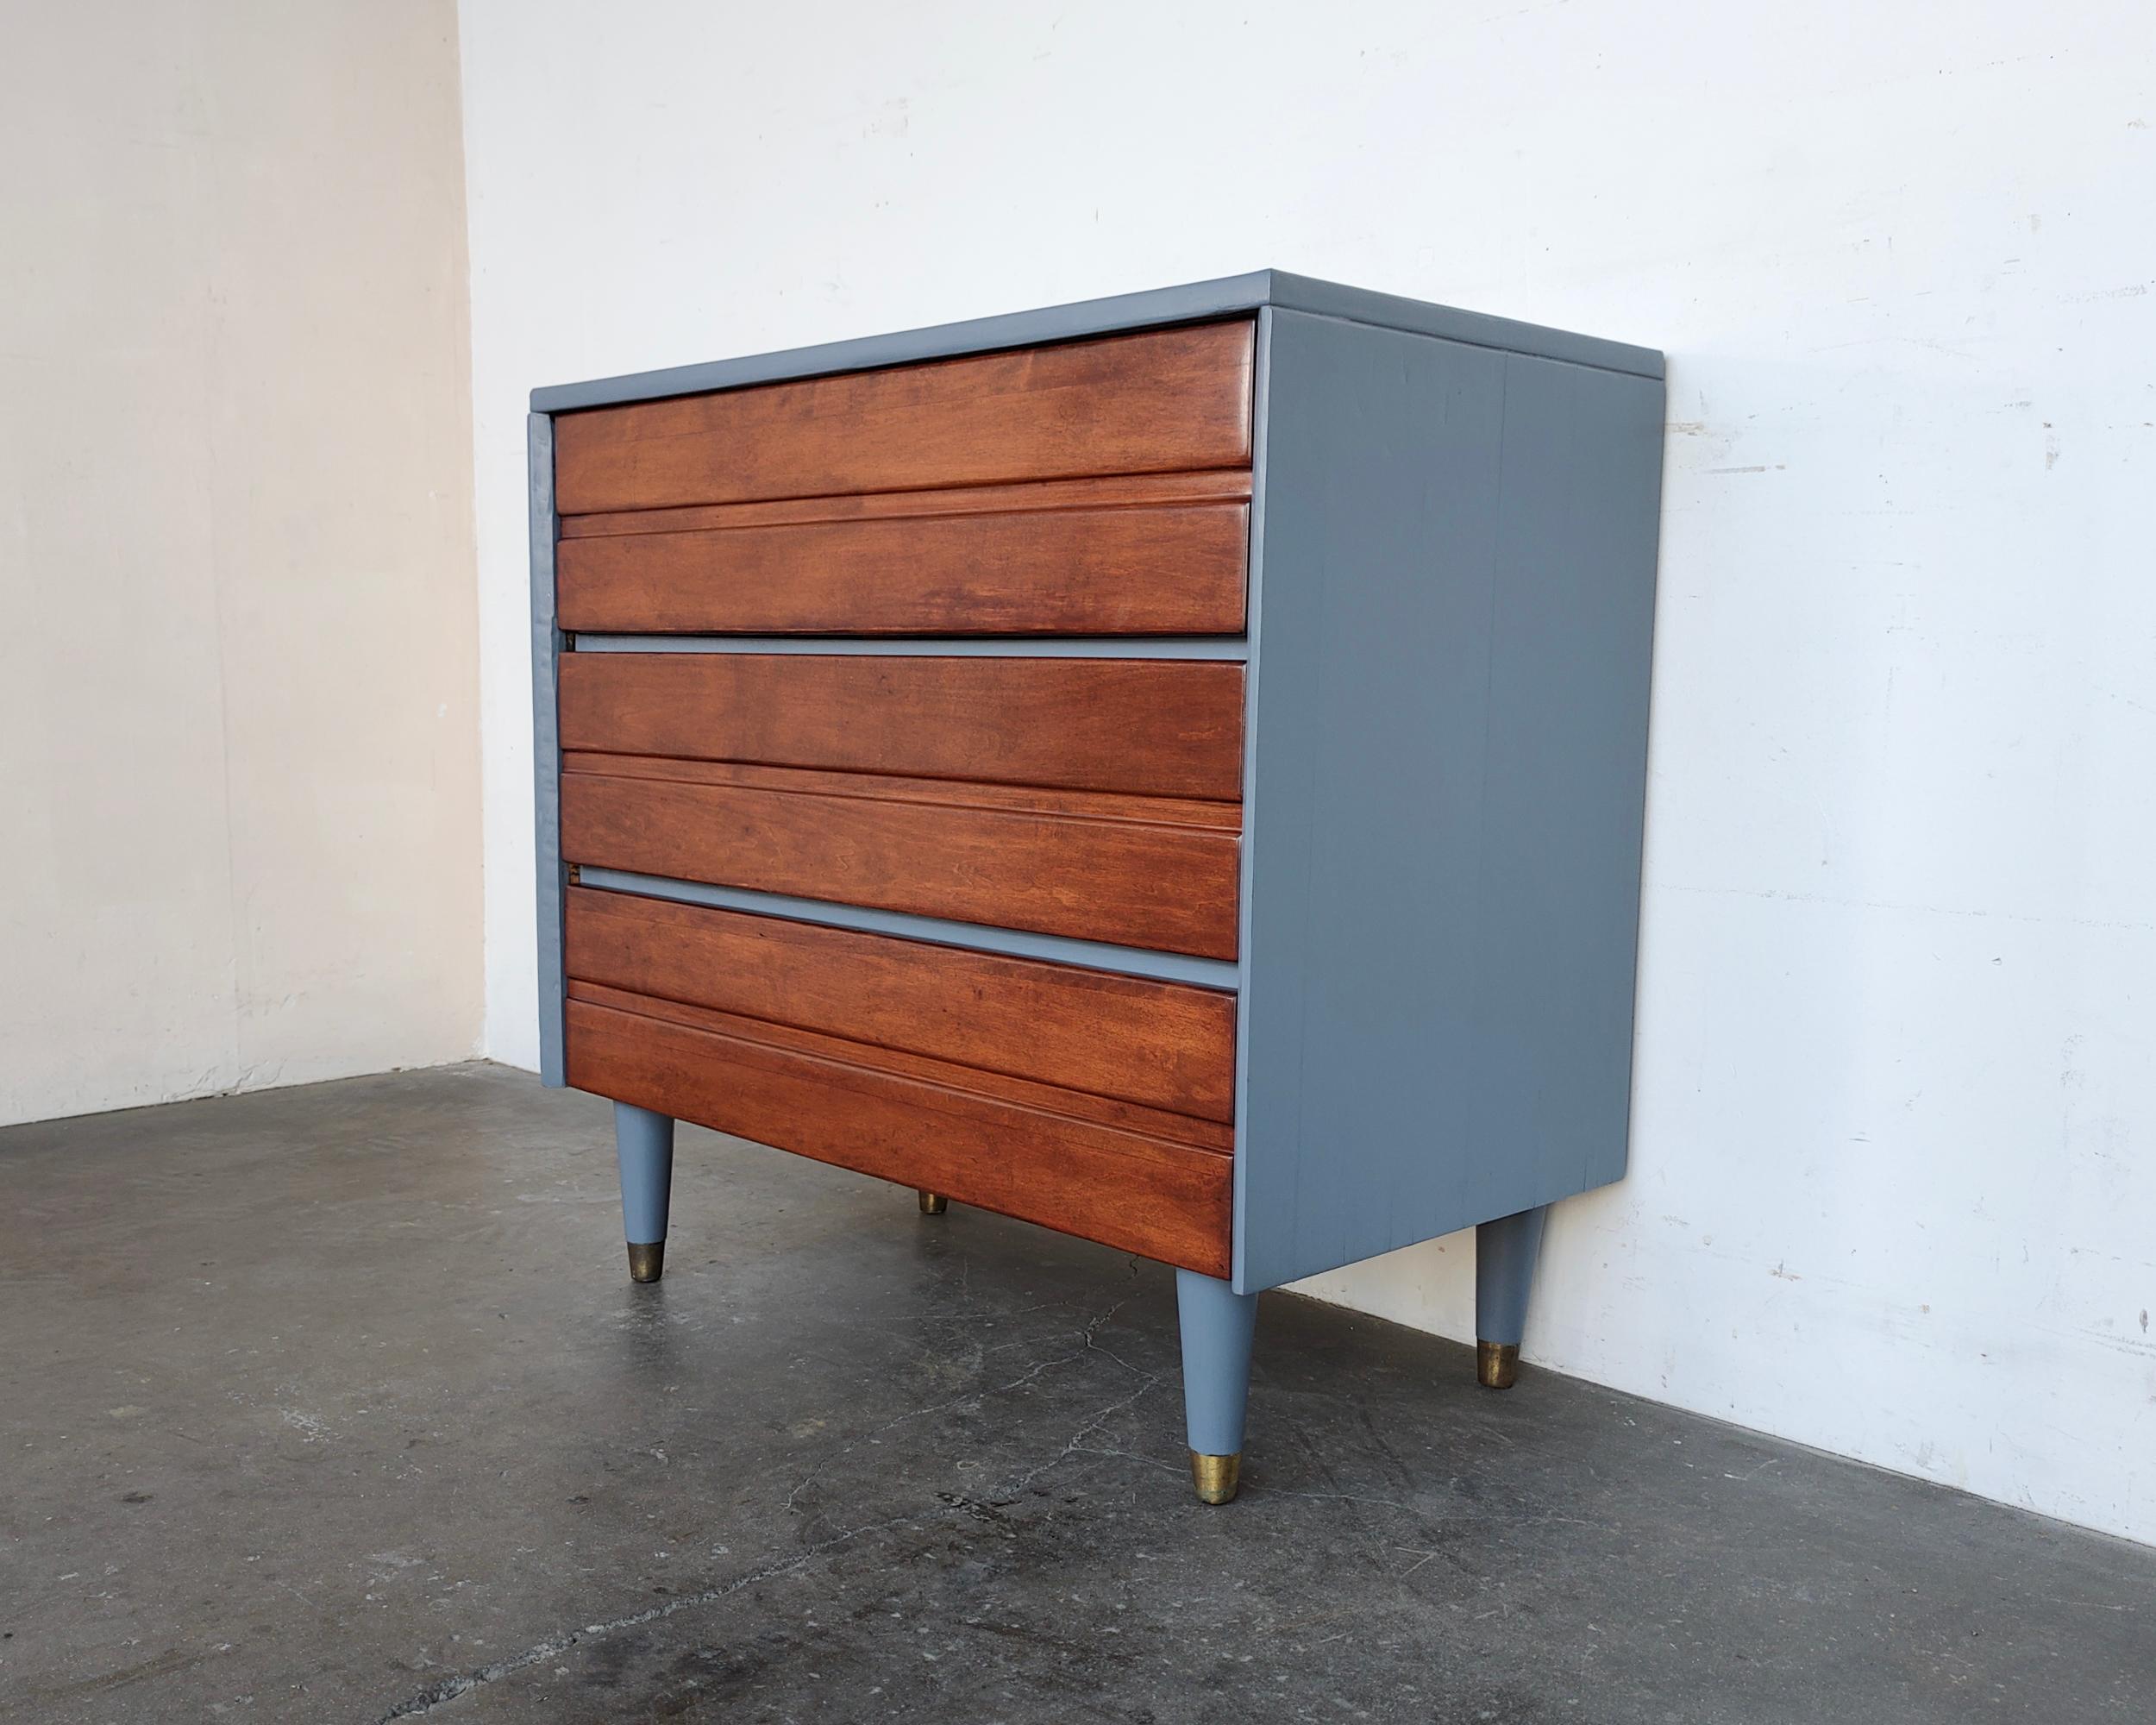 Completely restored three-drawer dresser with recessed horizontal pattern. Tapered legs and painted grey-blue sides. Solid wood construction with dovetail joinery. Overall great condition, some light damage to lower sides as shown in